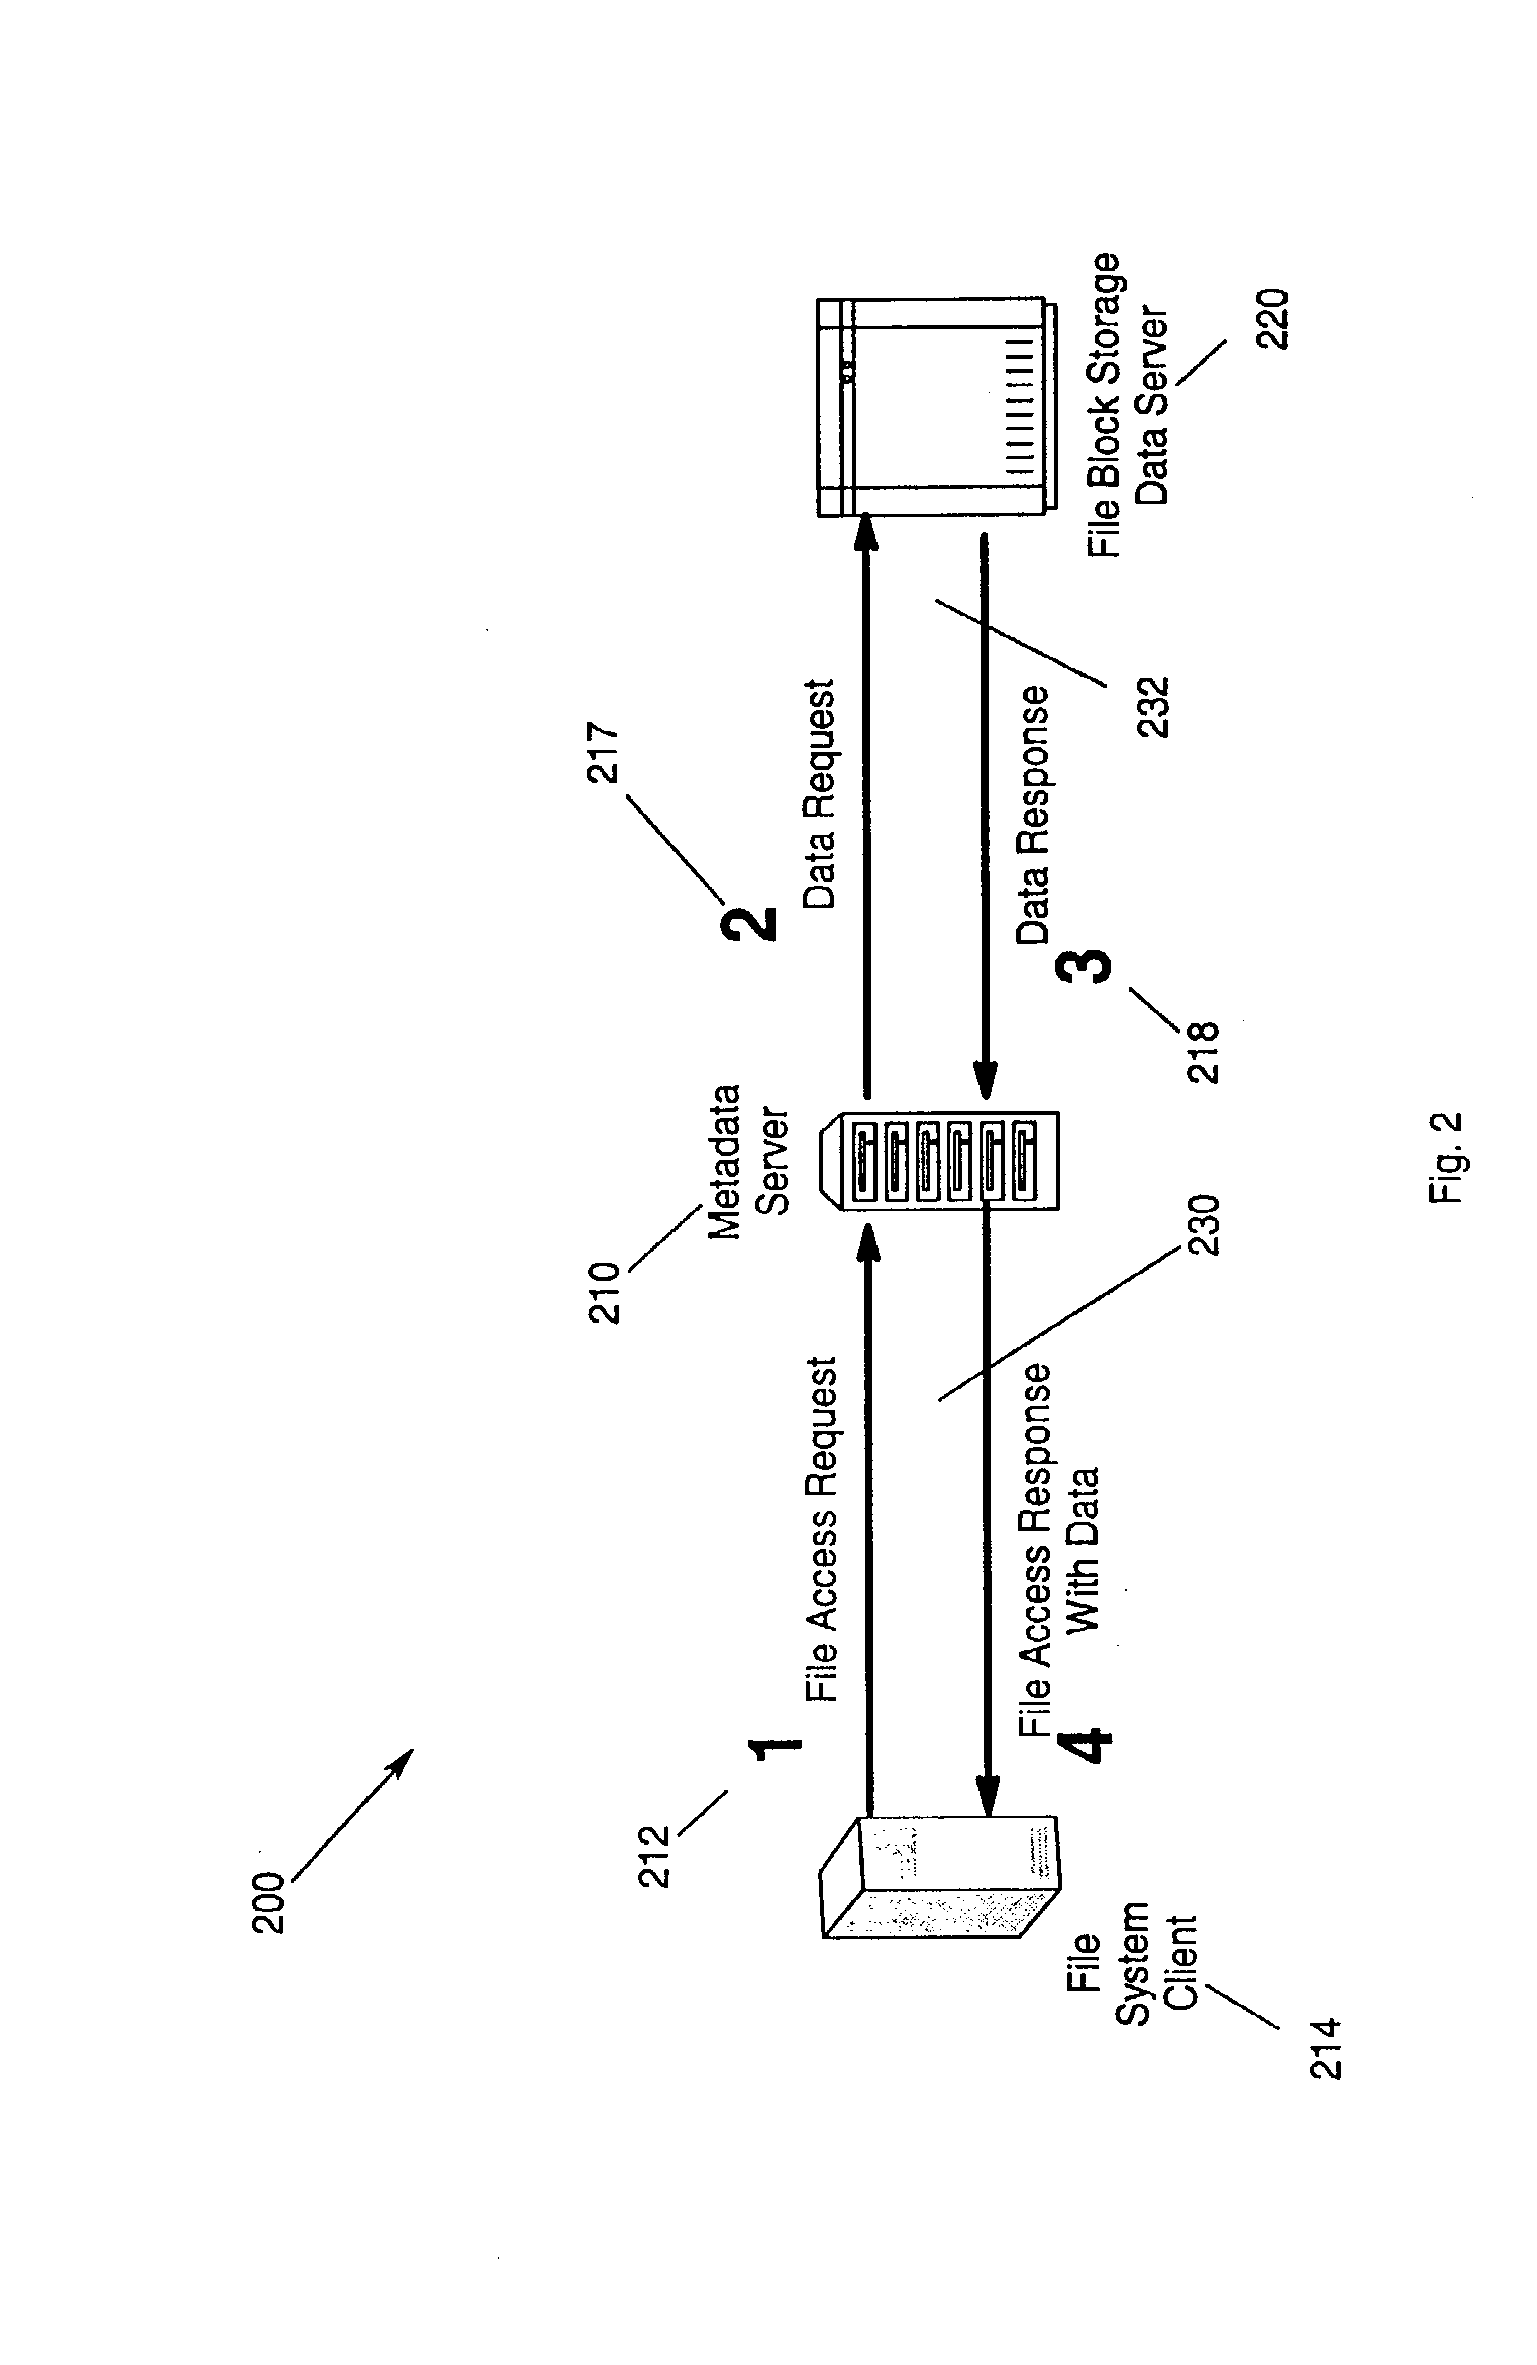 Distributed file serving architecture system with metadata storage virtualization and data access at the data server connection speed